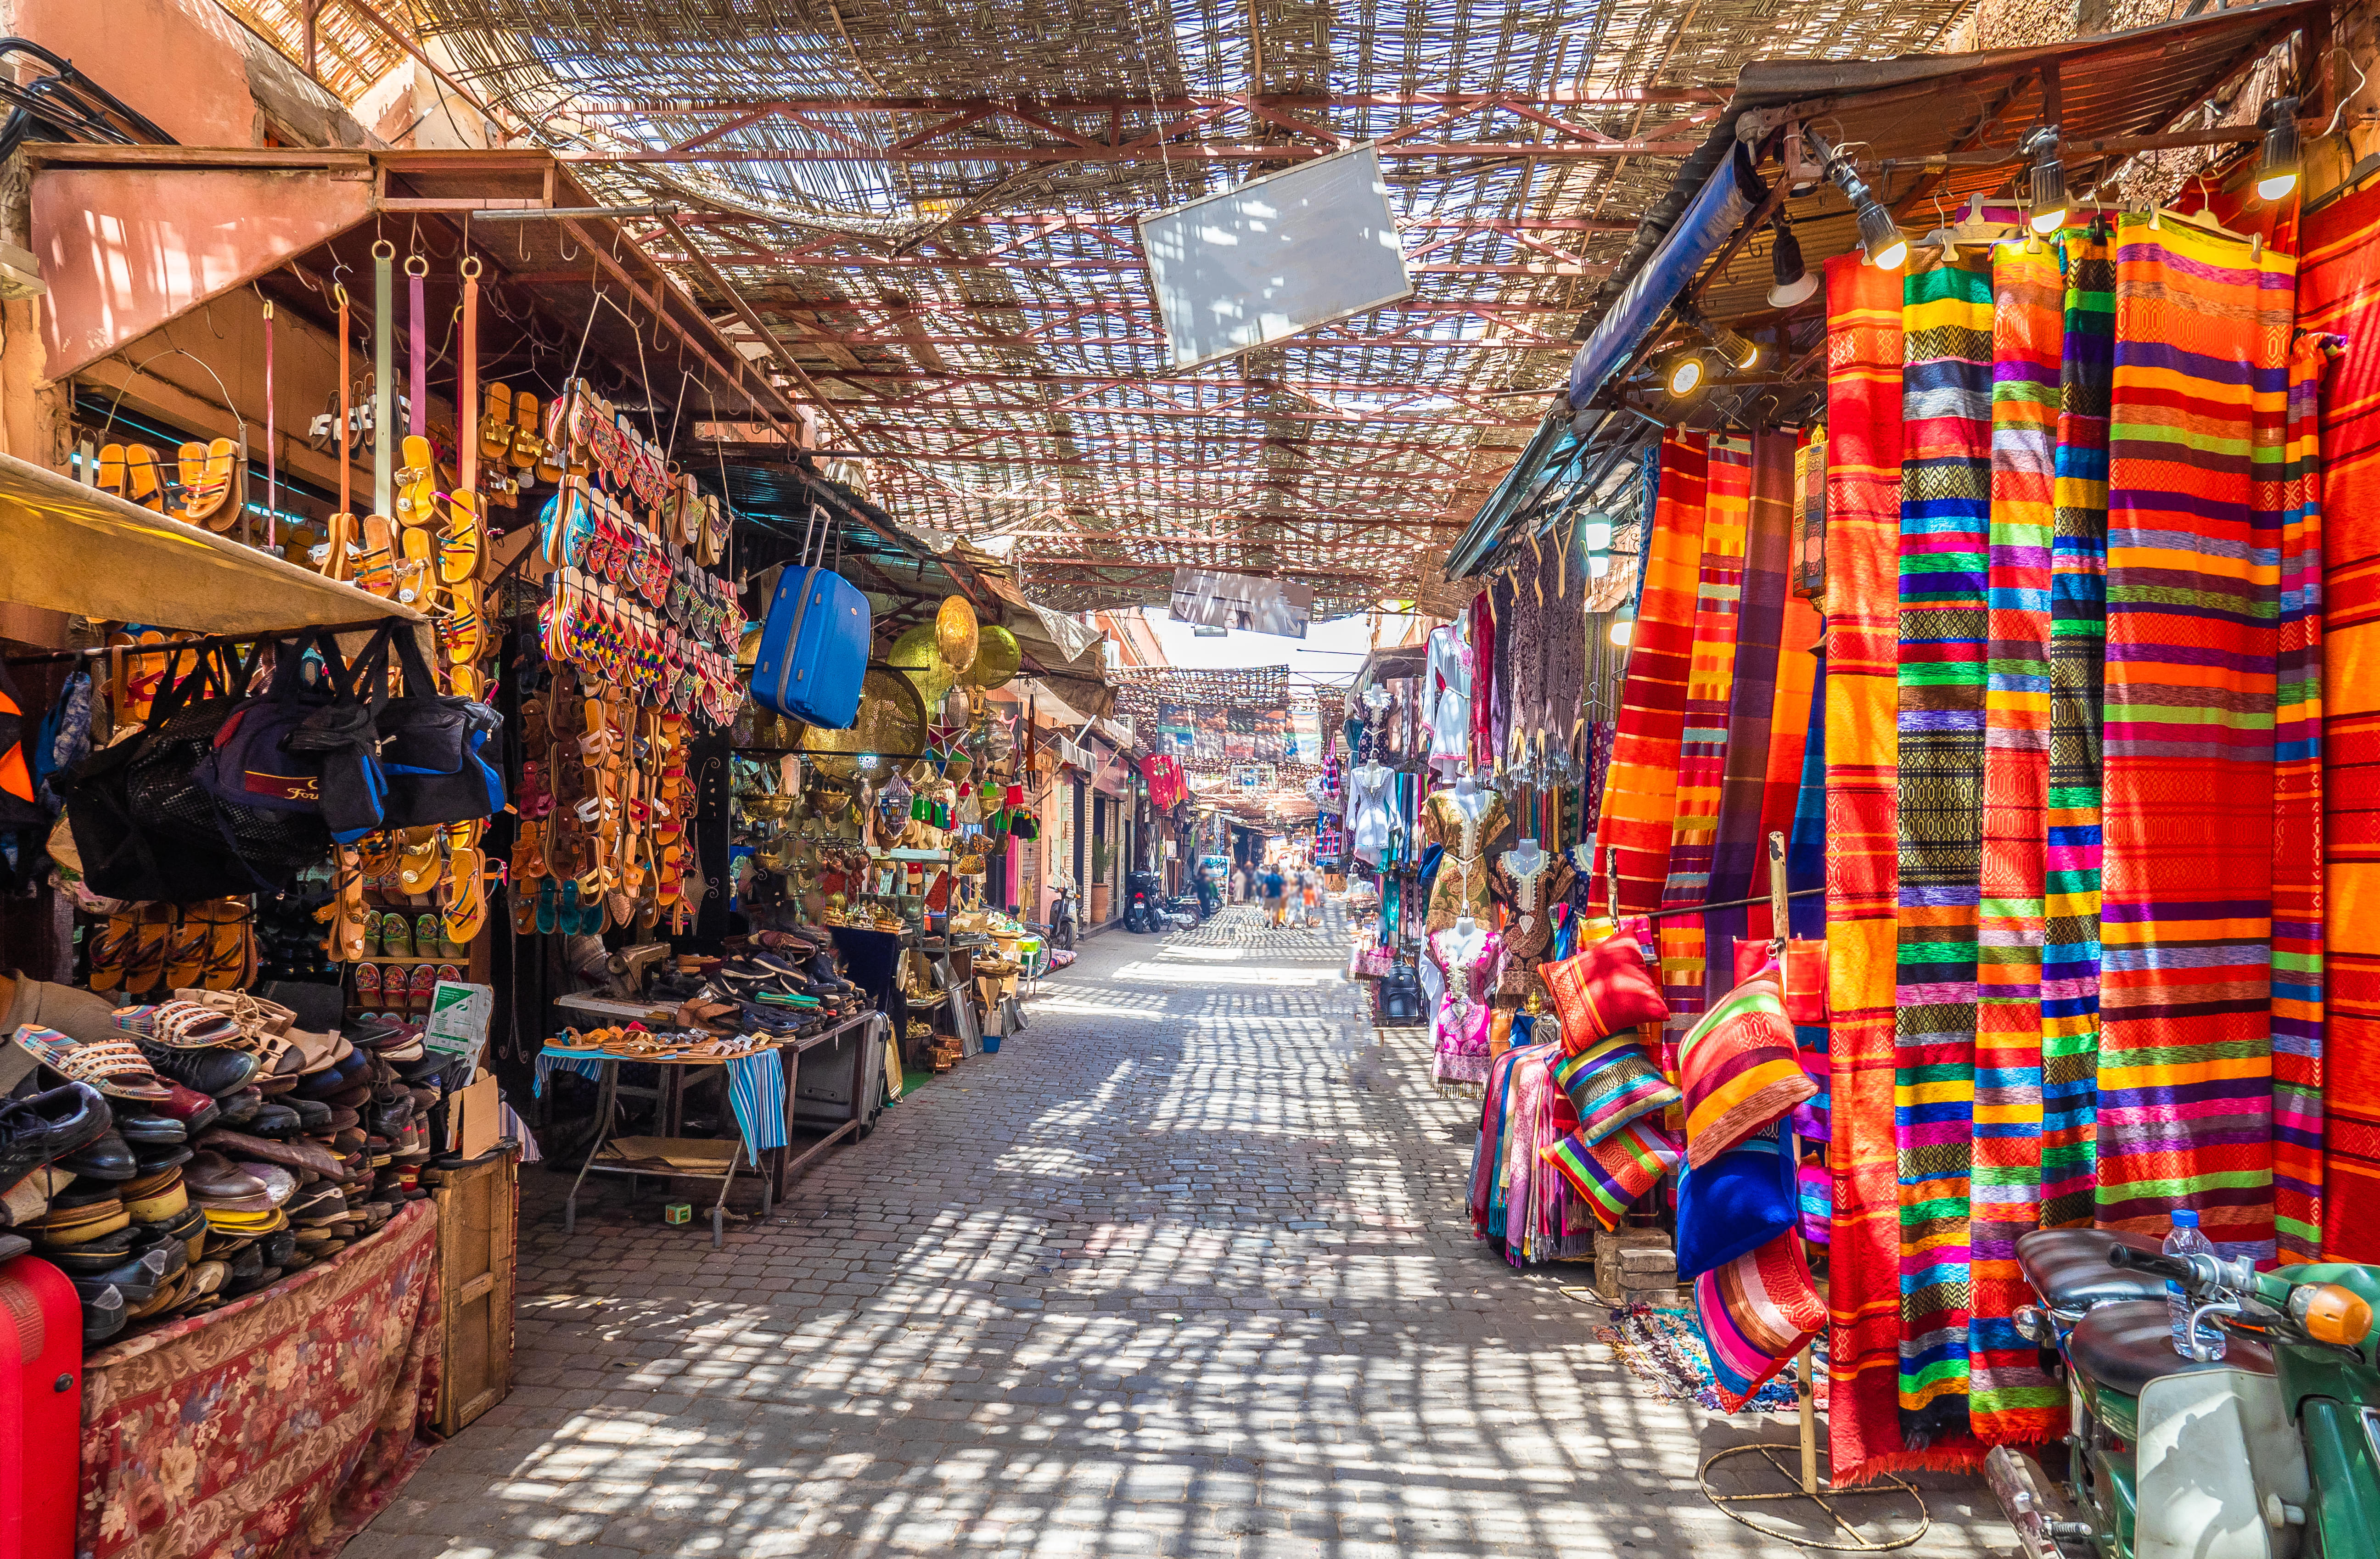 Morocco Packages from Kerala | Get Upto 40% Off